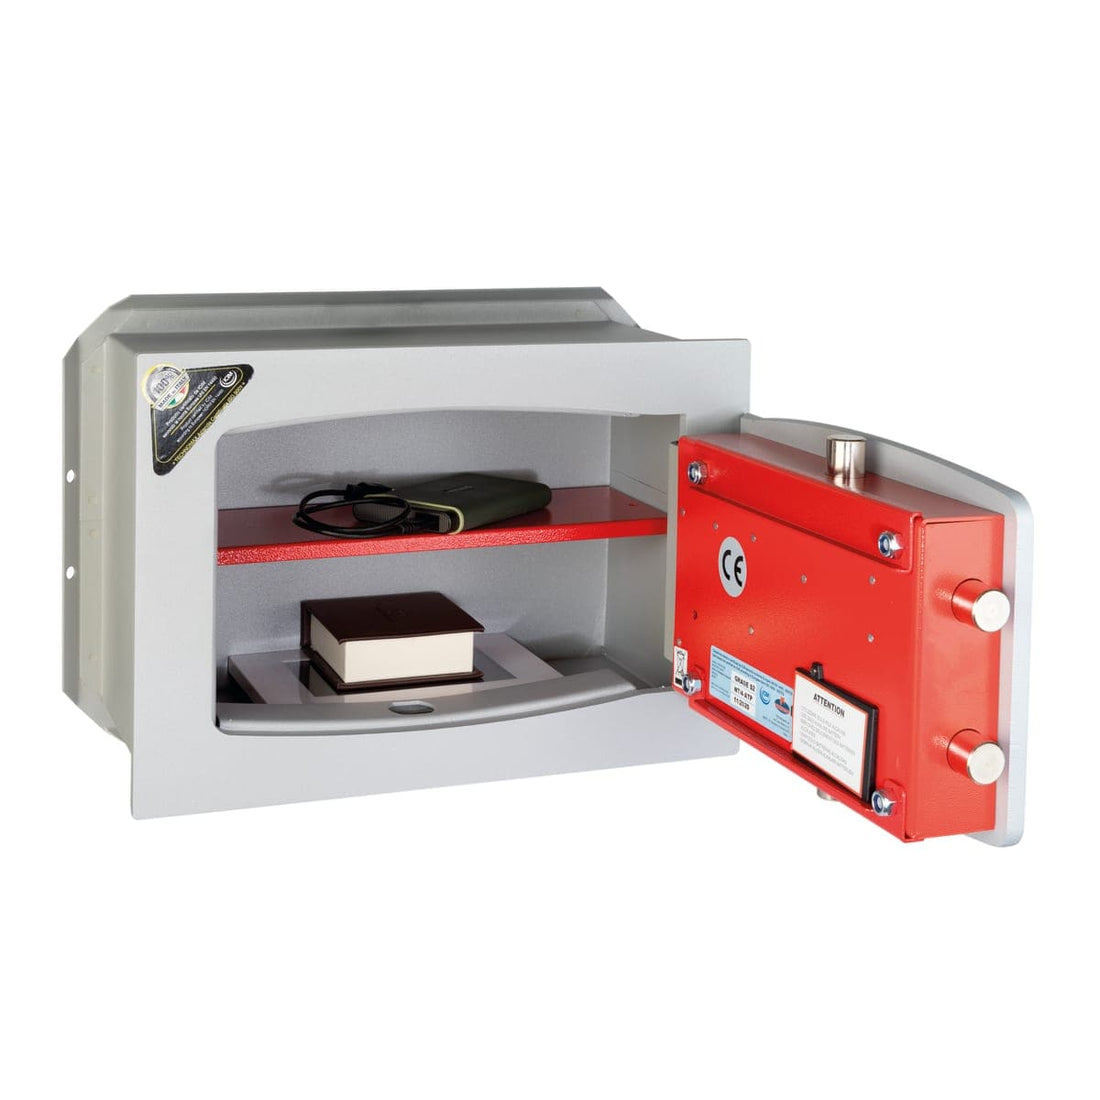 WALL SAFE NT/4AT ELET.MO - best price from Maltashopper.com BR410005685